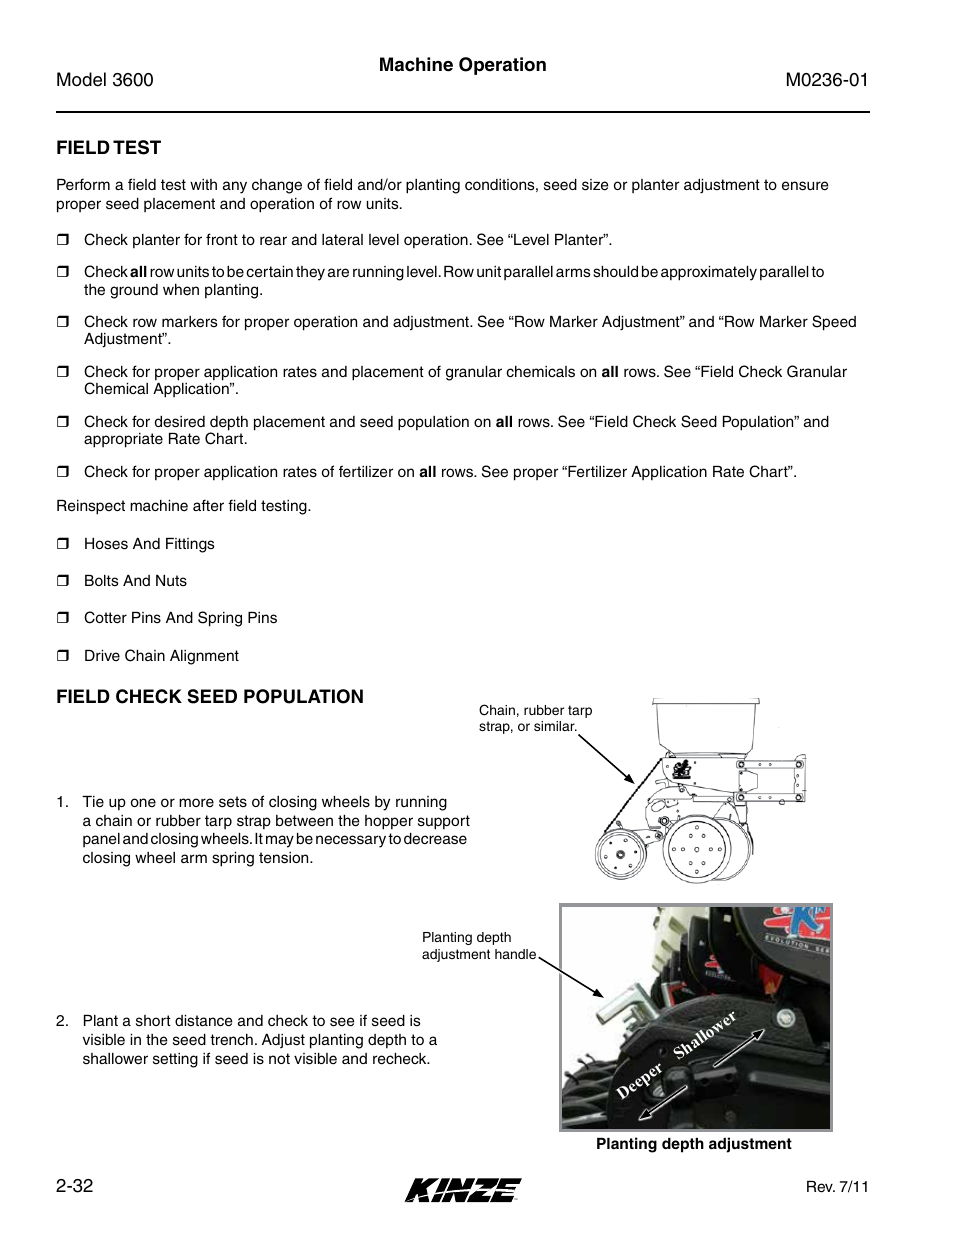 Field test, Field check seed population, Field test -32 | Field check seed population -32 | Kinze 3600 Lift and Rotate Planter Rev. 7/14 User Manual | Page 42 / 172